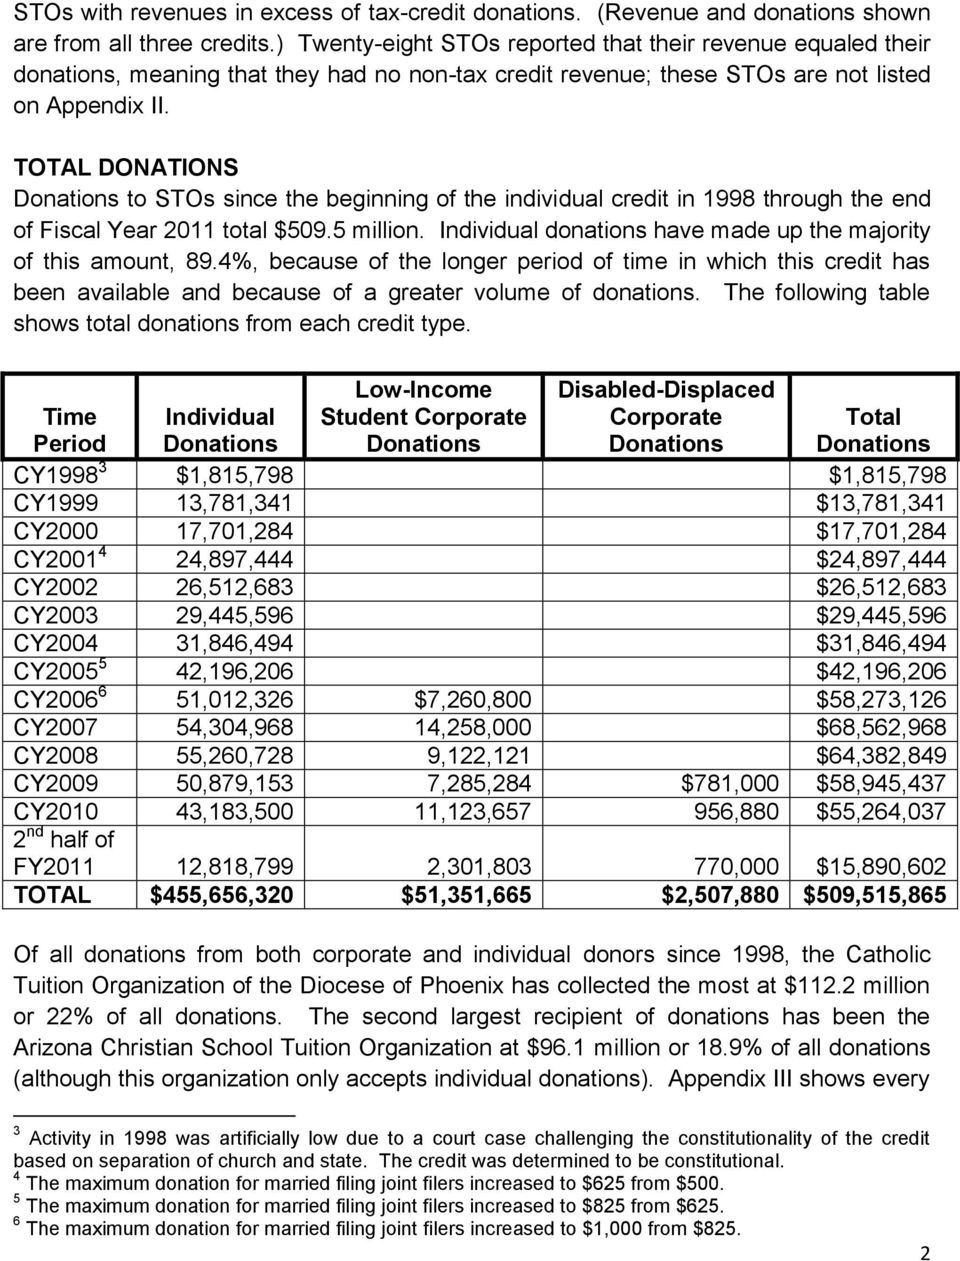 TOTAL DONATIONS to STOs since the beginning of the individual credit in 1998 through the end of Fiscal Year 2011 total $509.5 million.